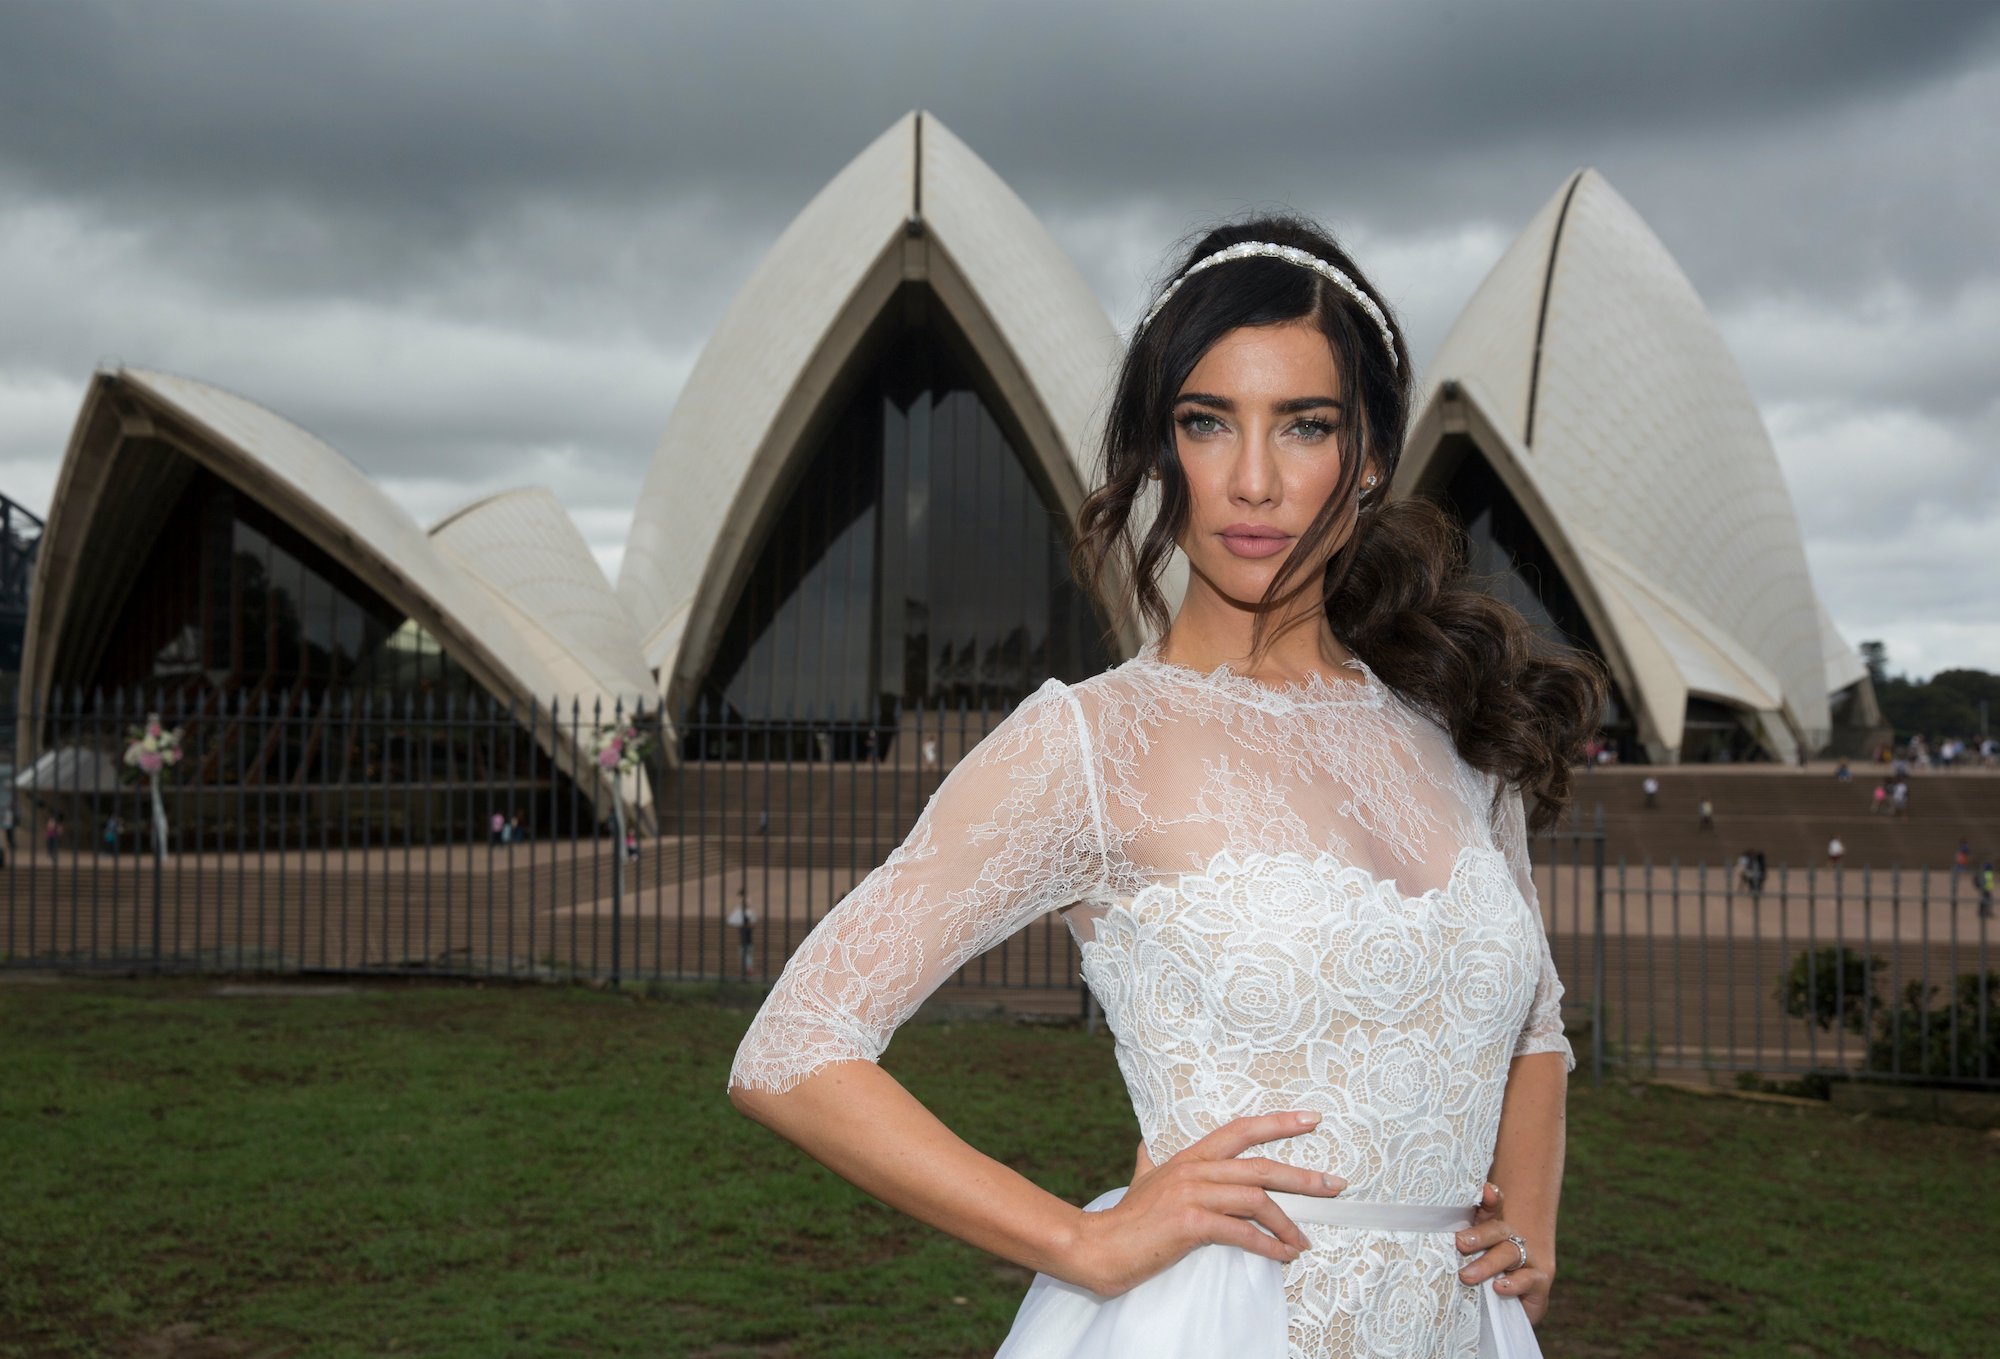 Jacqueline MacInnes Wood smiling in a wedding dress, in front of the Sydney Opera House